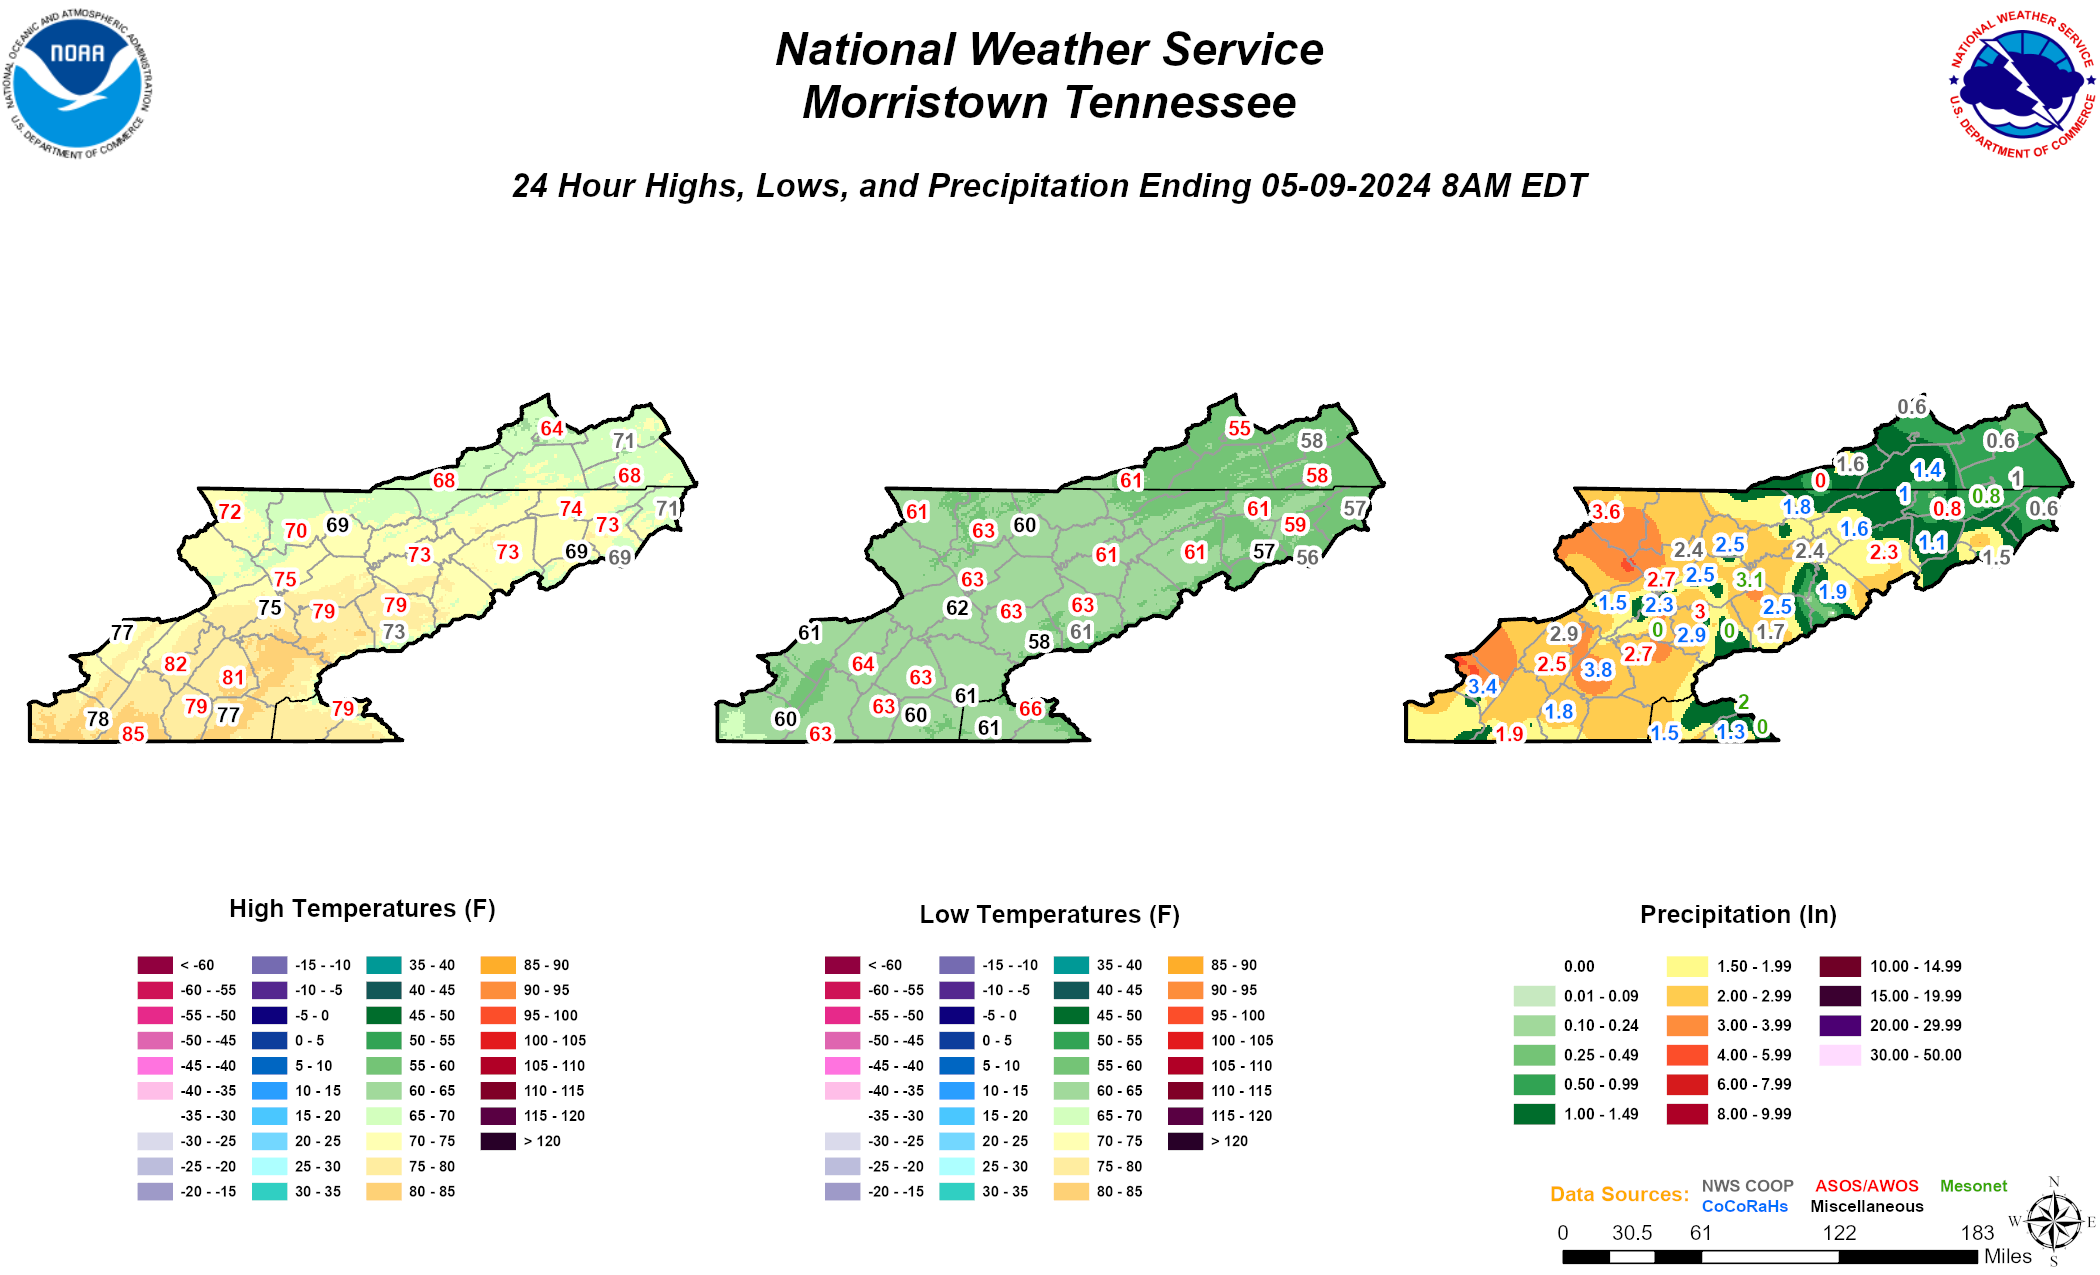 Tennessee Daily Highs, Lows, and Precipitation